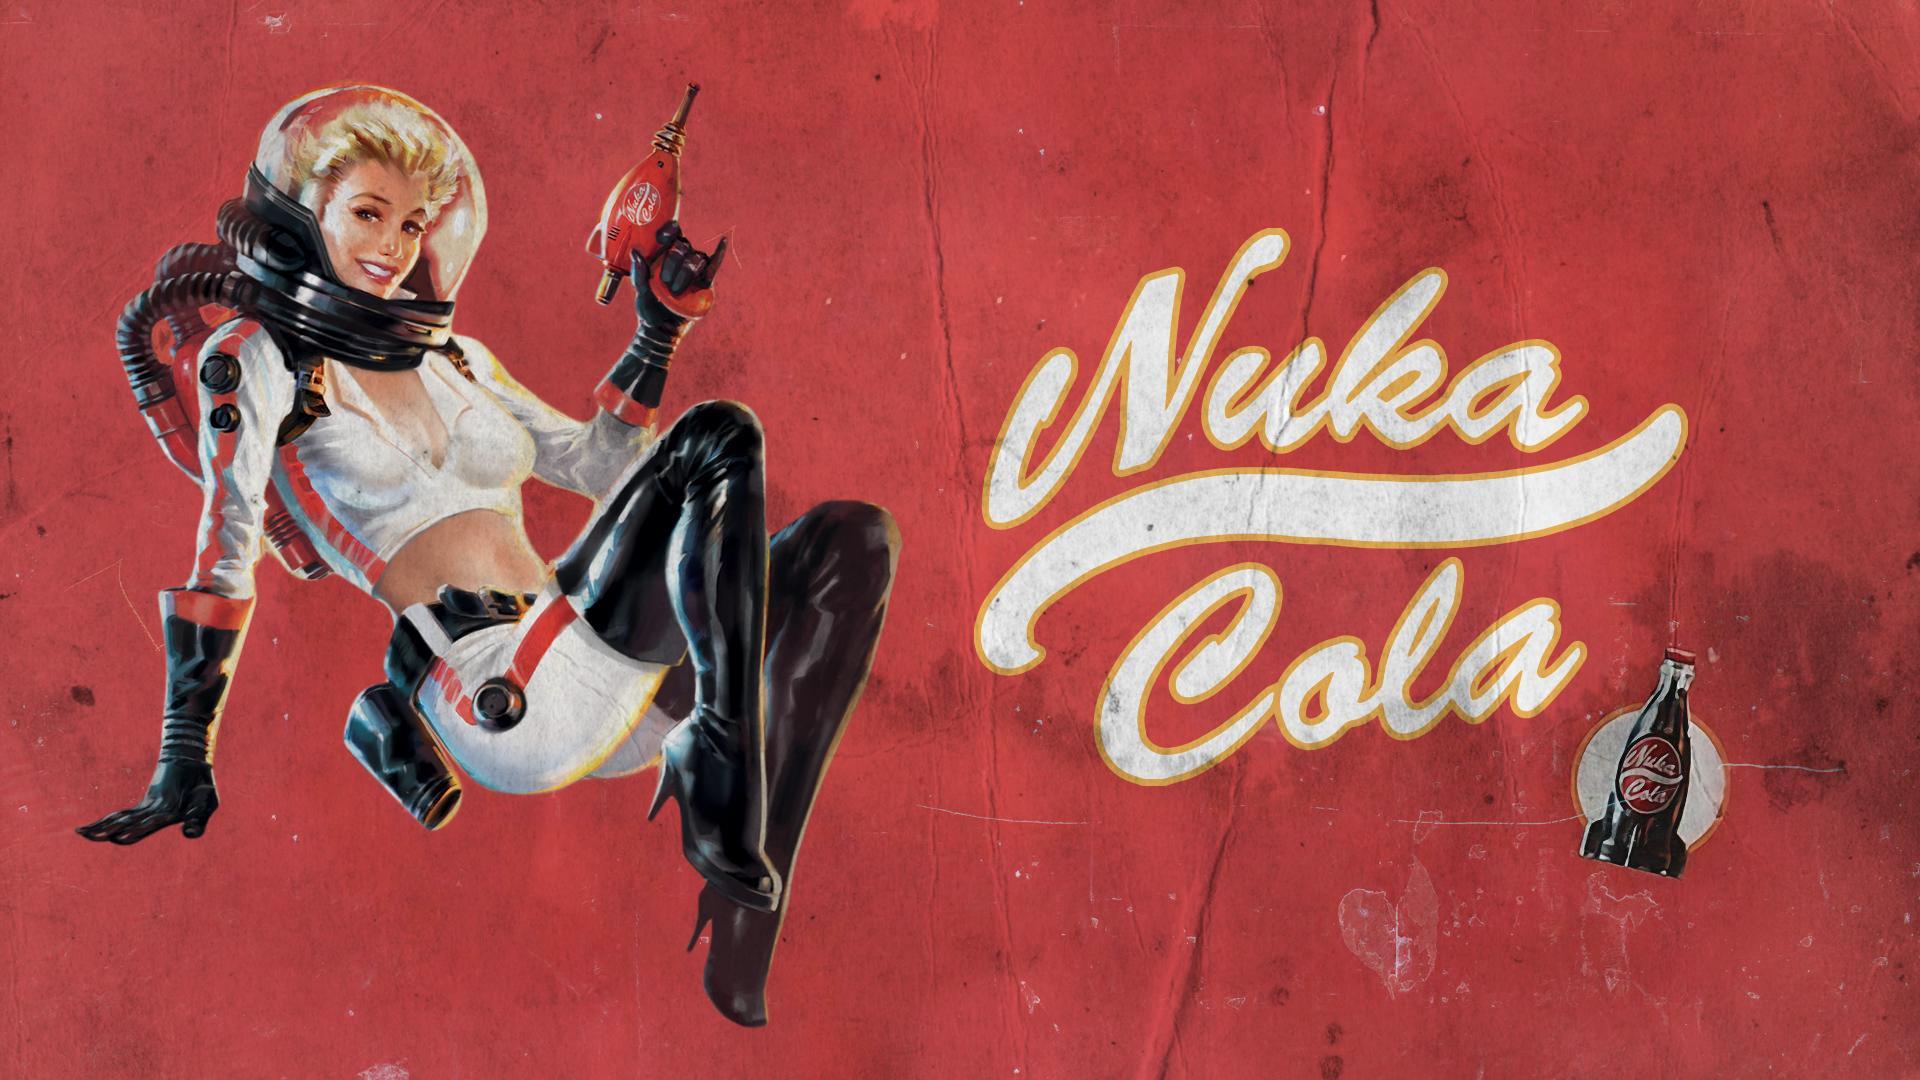 Fixed Up The Nuka Girl Pinup Wallpaper!